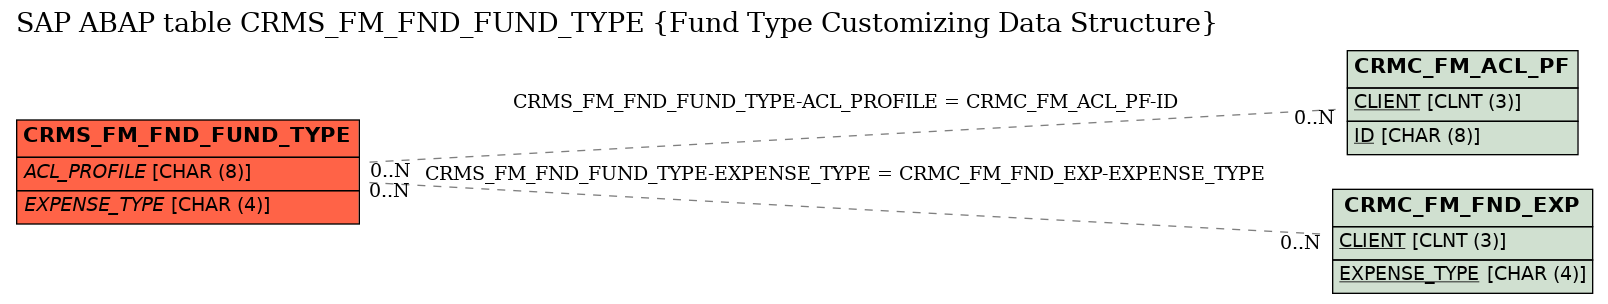 E-R Diagram for table CRMS_FM_FND_FUND_TYPE (Fund Type Customizing Data Structure)